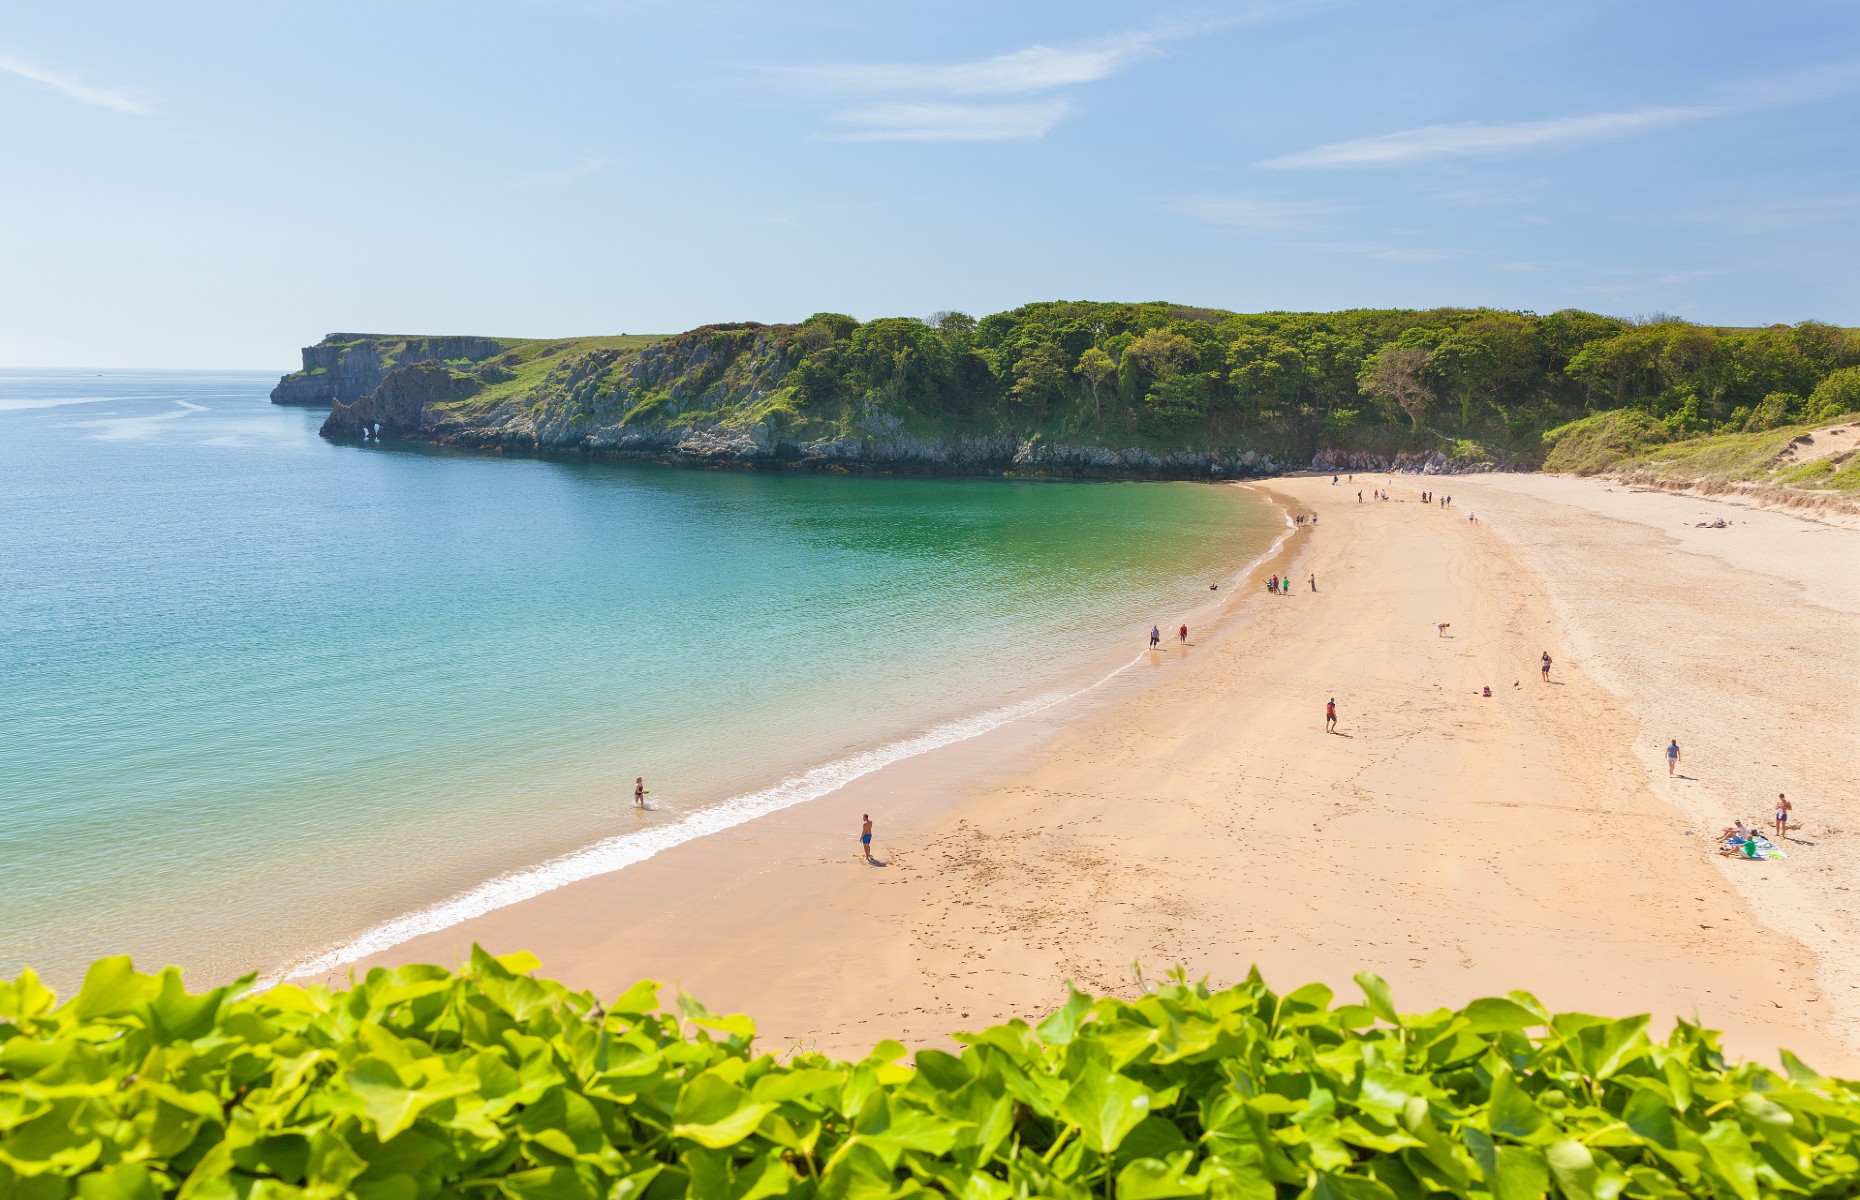 Barafundle Bay (Image: Billy Stock/Shutterstock)